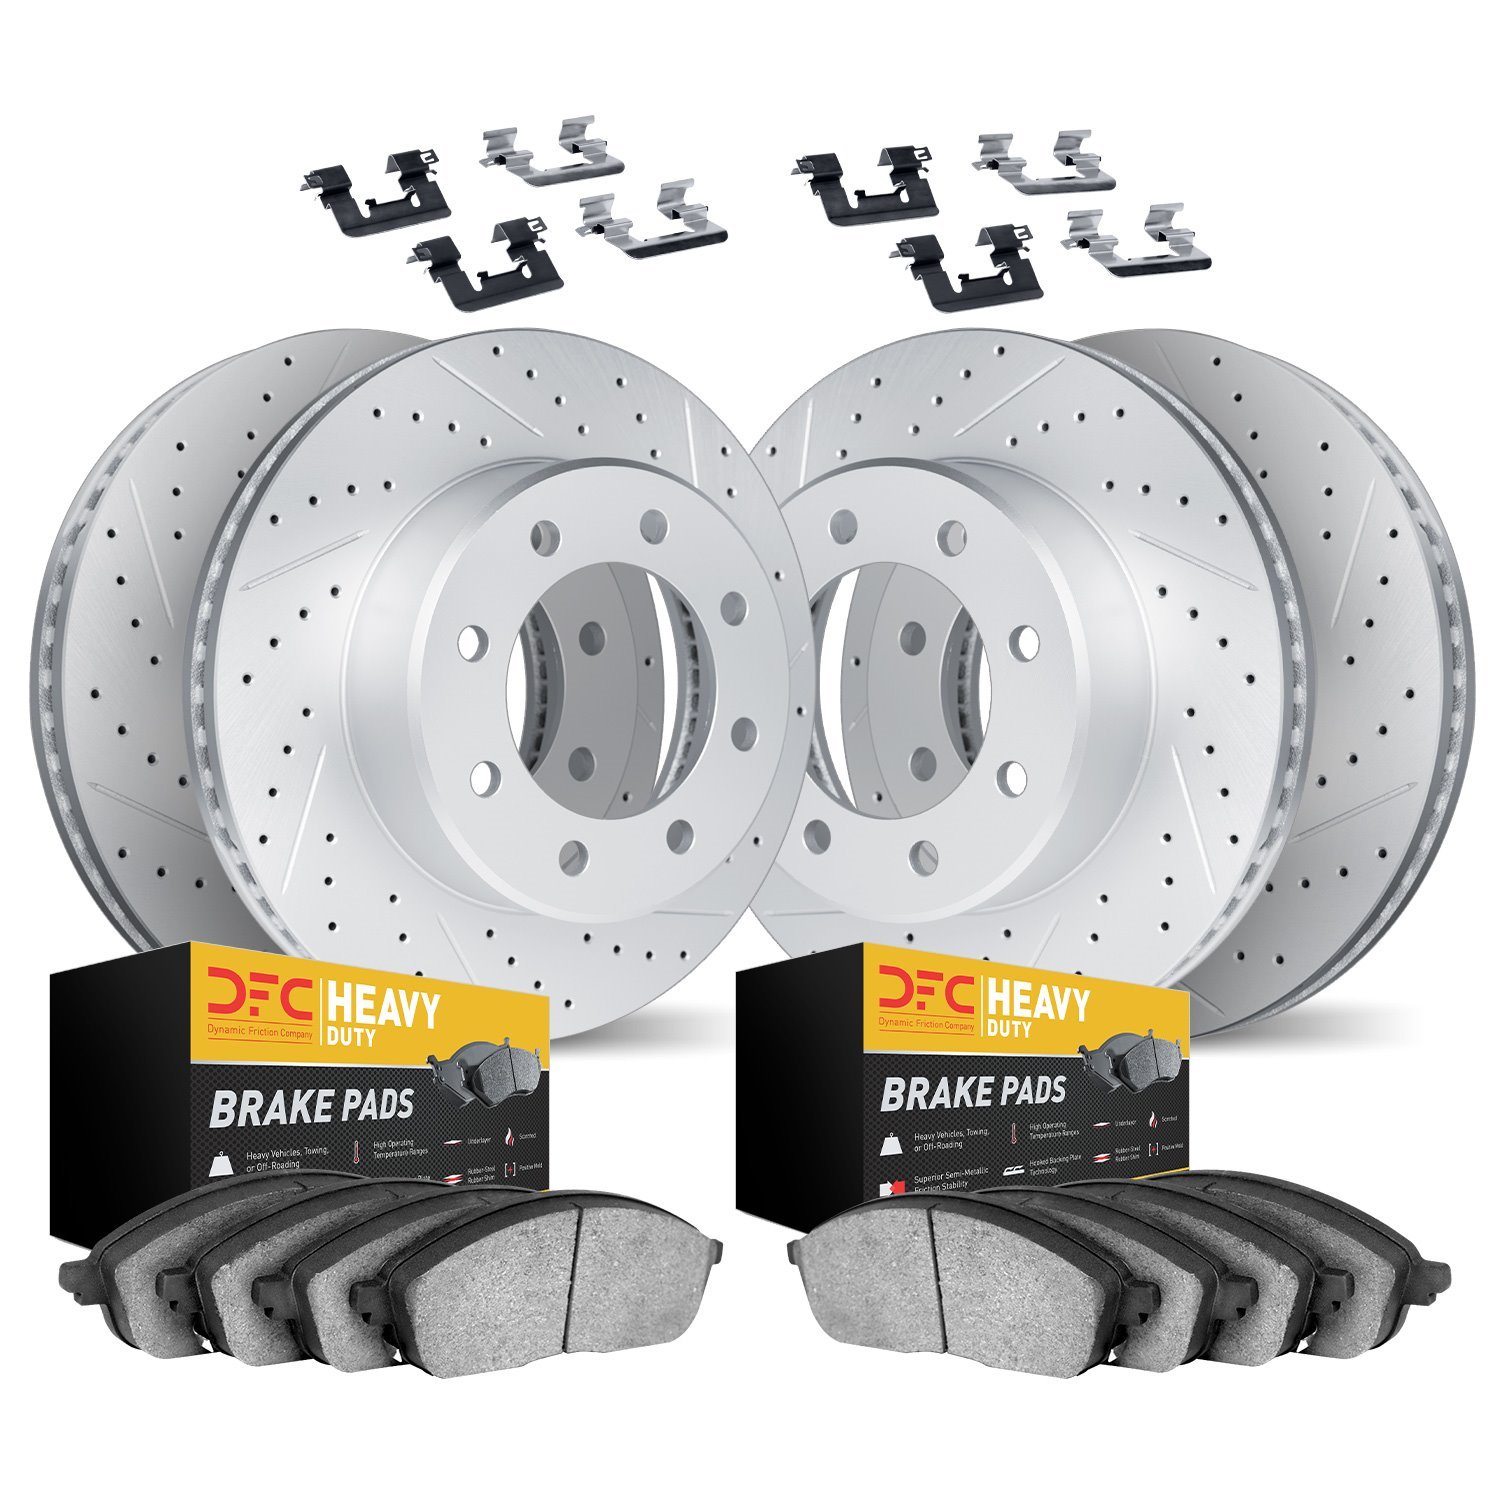 2214-99086 Geoperformance Drilled/Slotted Rotors w/Heavy-Duty Pads Kit & Hardware, 2012-2012 Ford/Lincoln/Mercury/Mazda, Positio